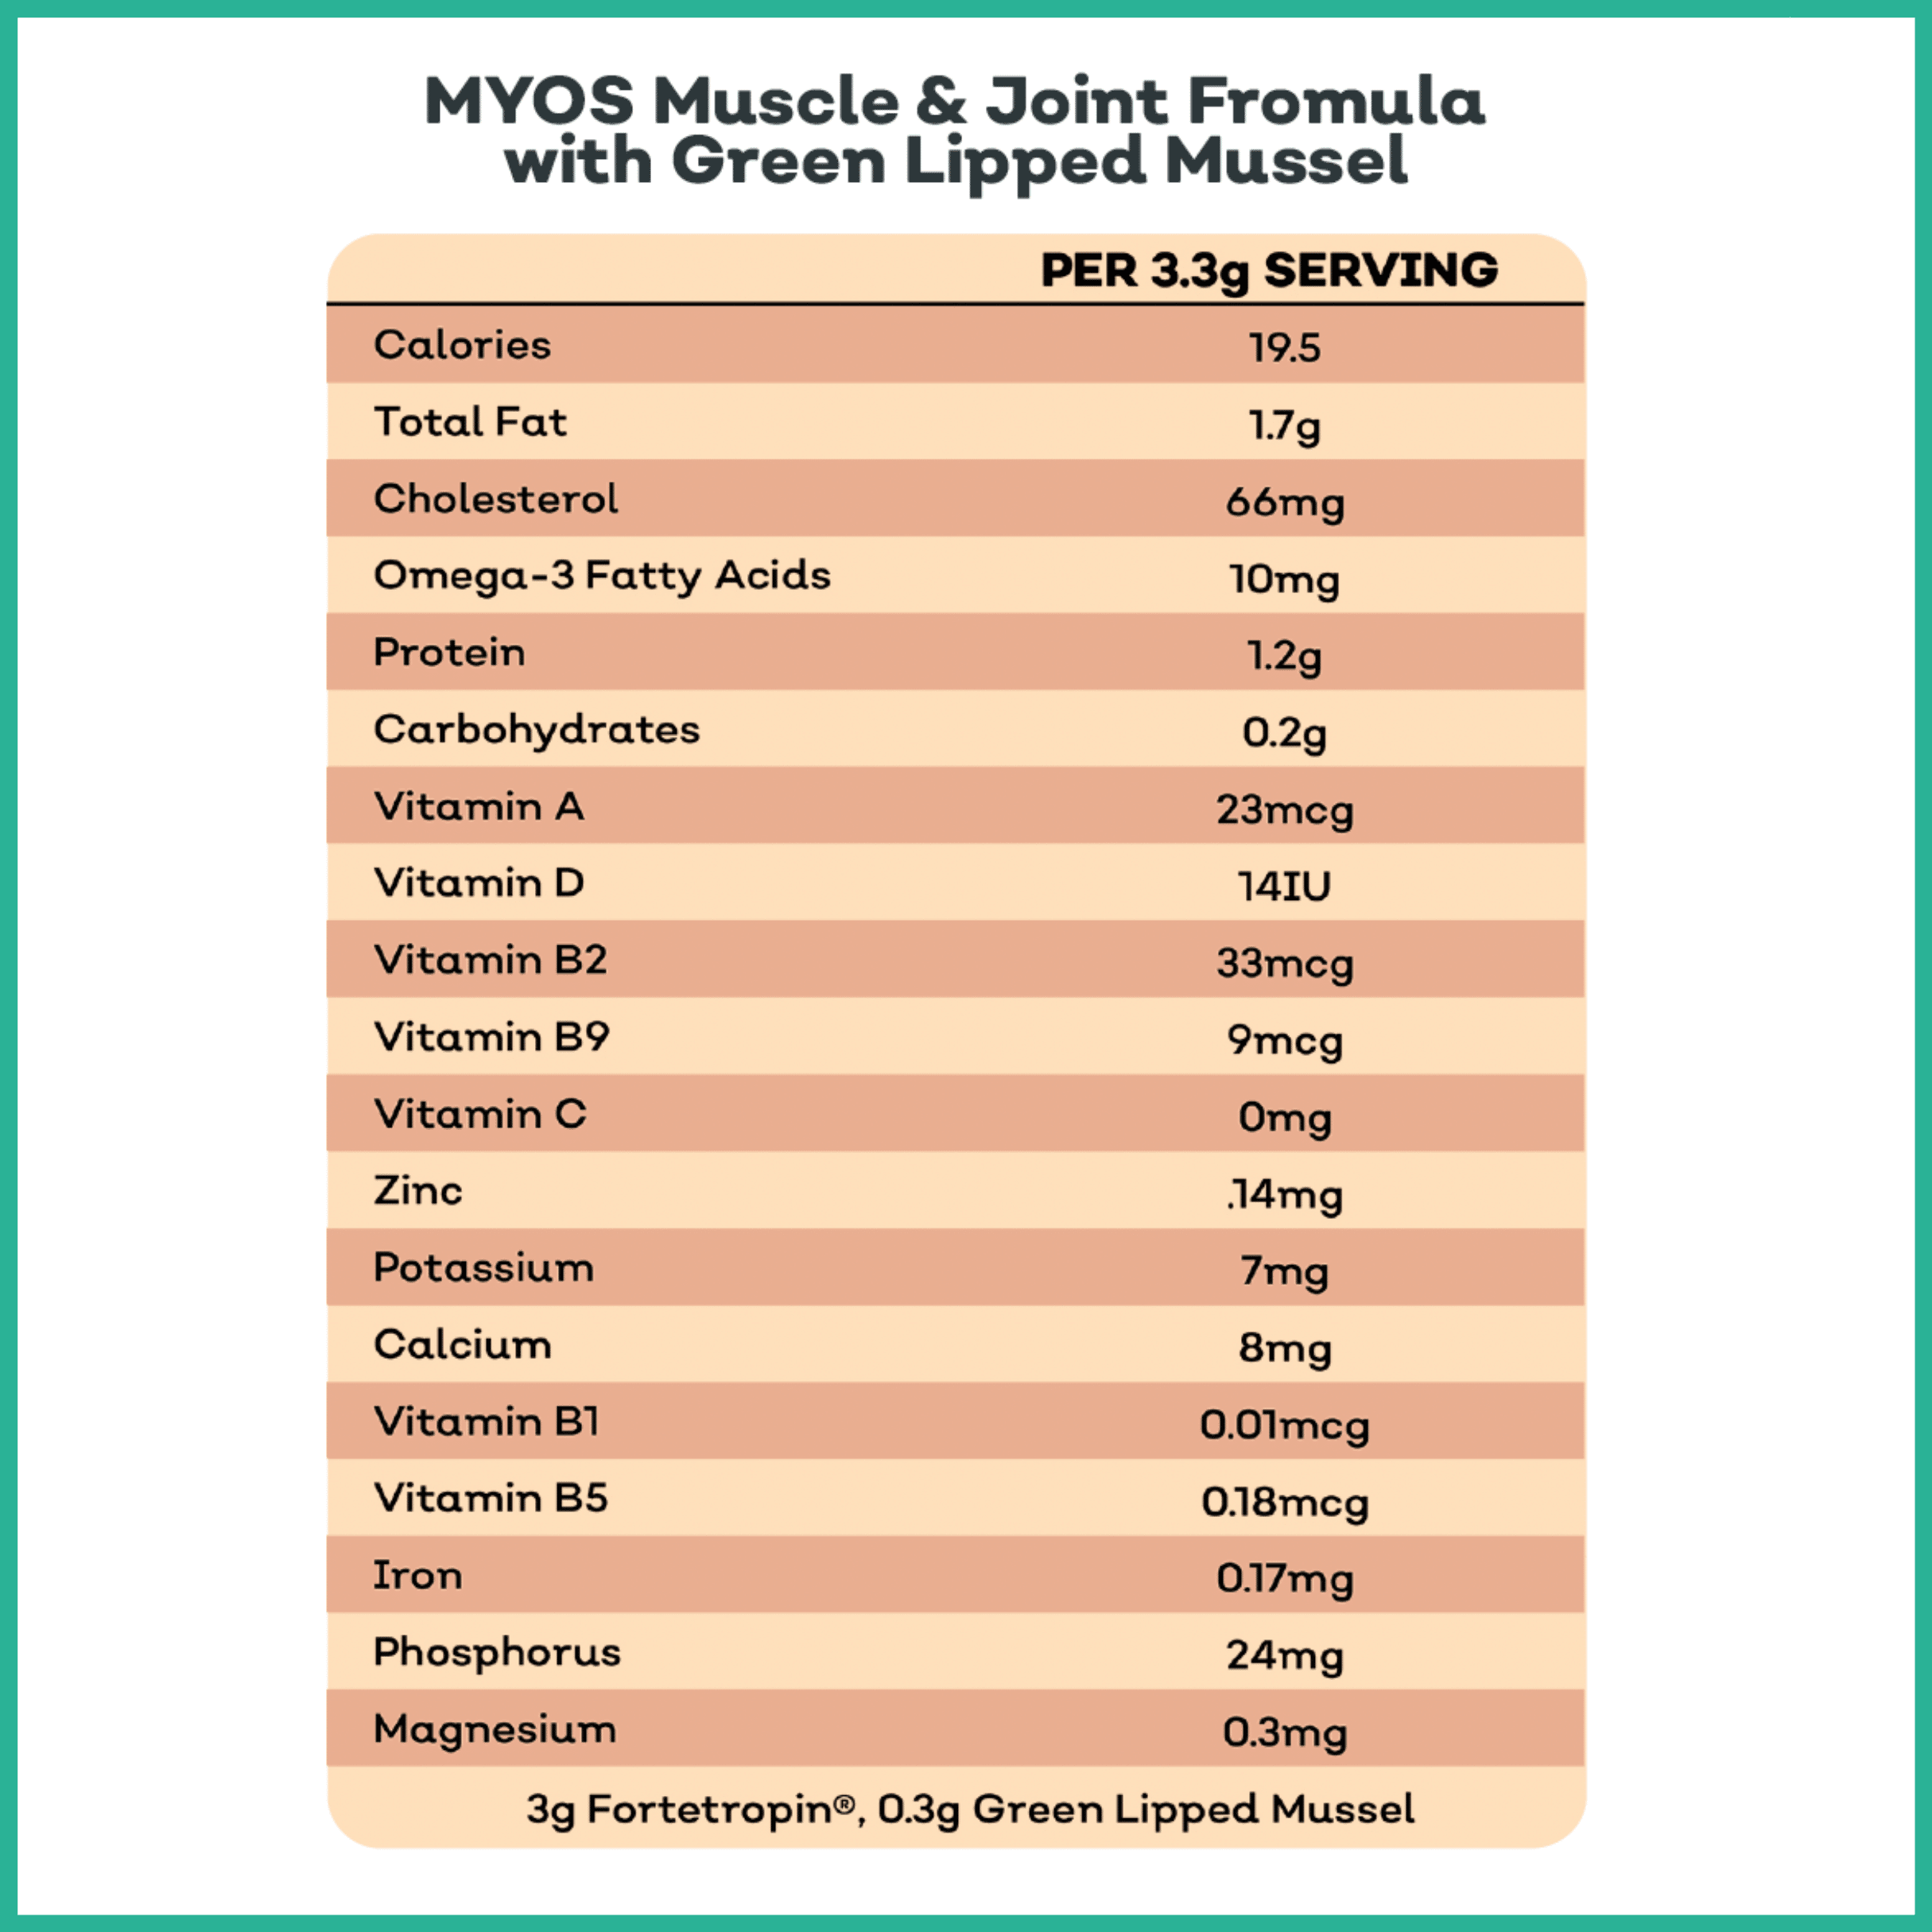 MYOS Muscle & Joint Formula with Green Lipped Mussel Dog Supplements myospet.com 